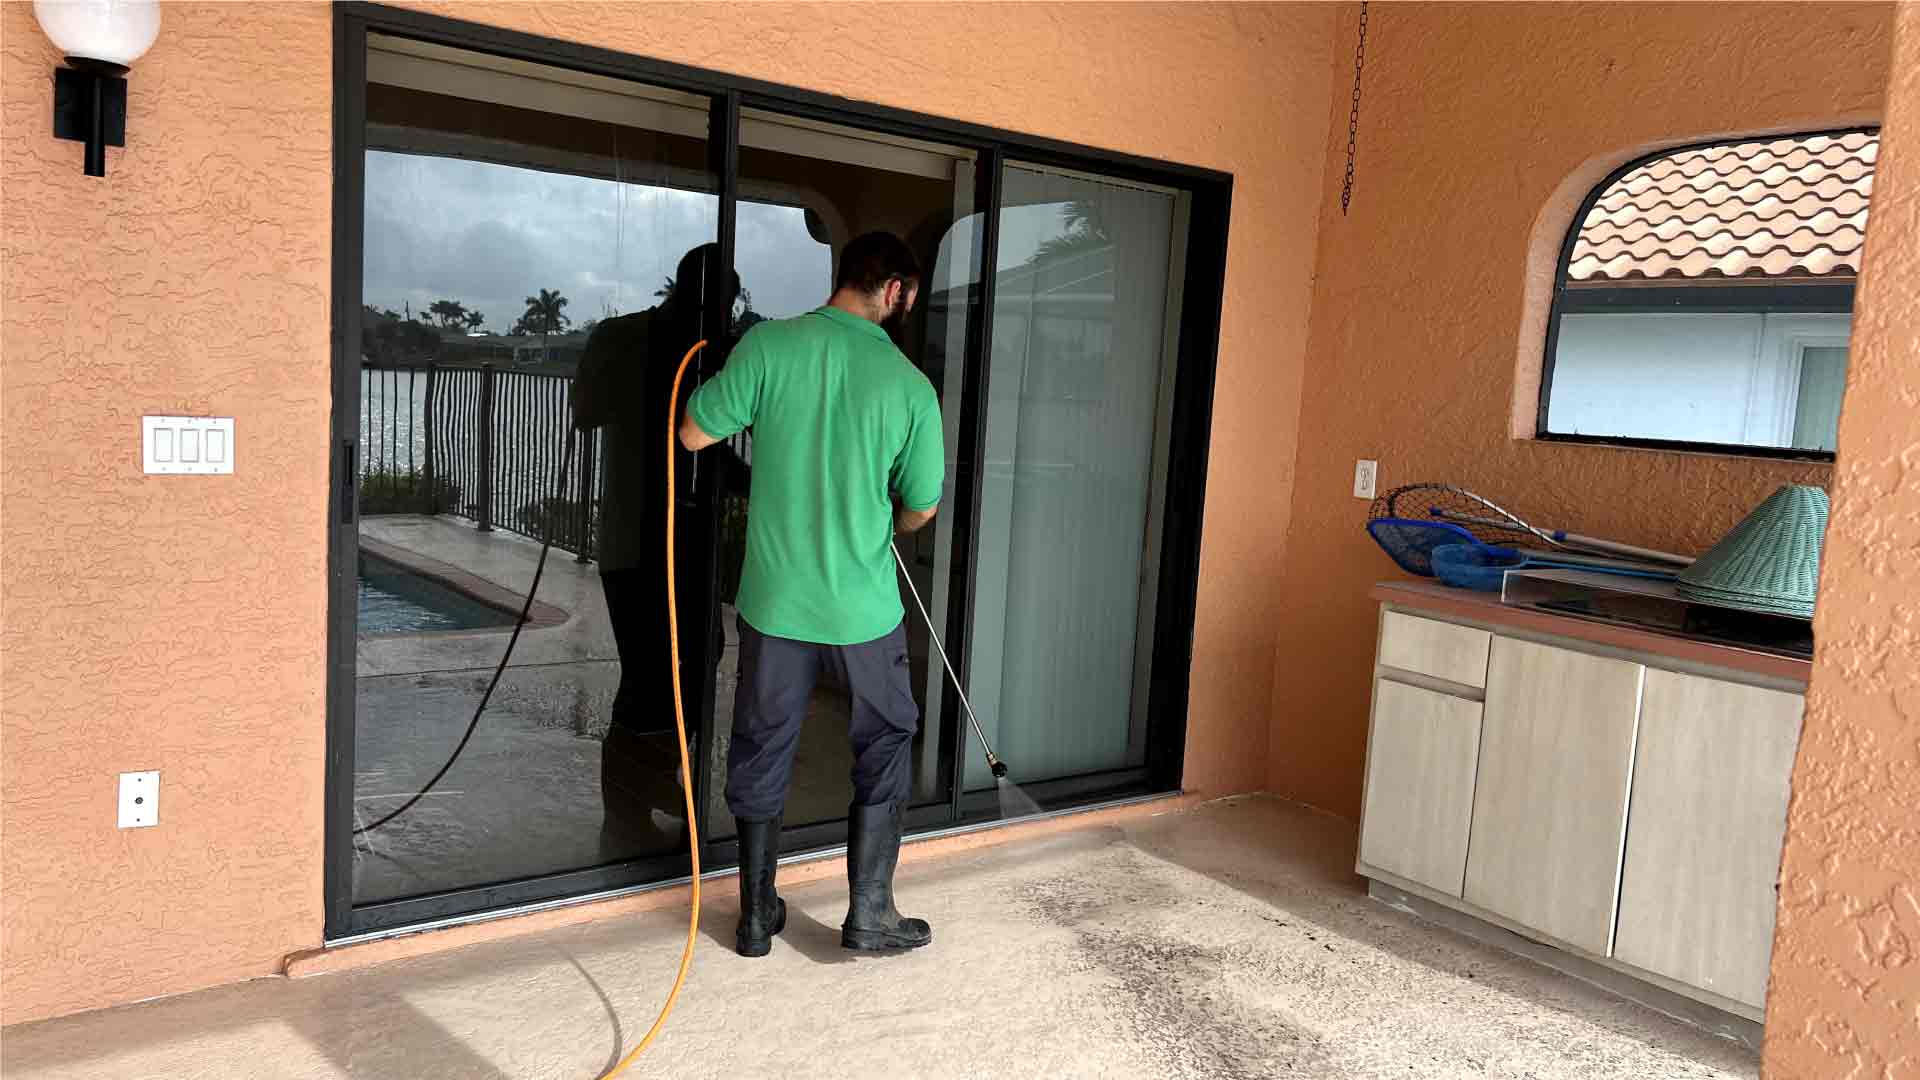 Pressure washing – Feb 12 | Goldmillio cleaning service in Cape Coral 